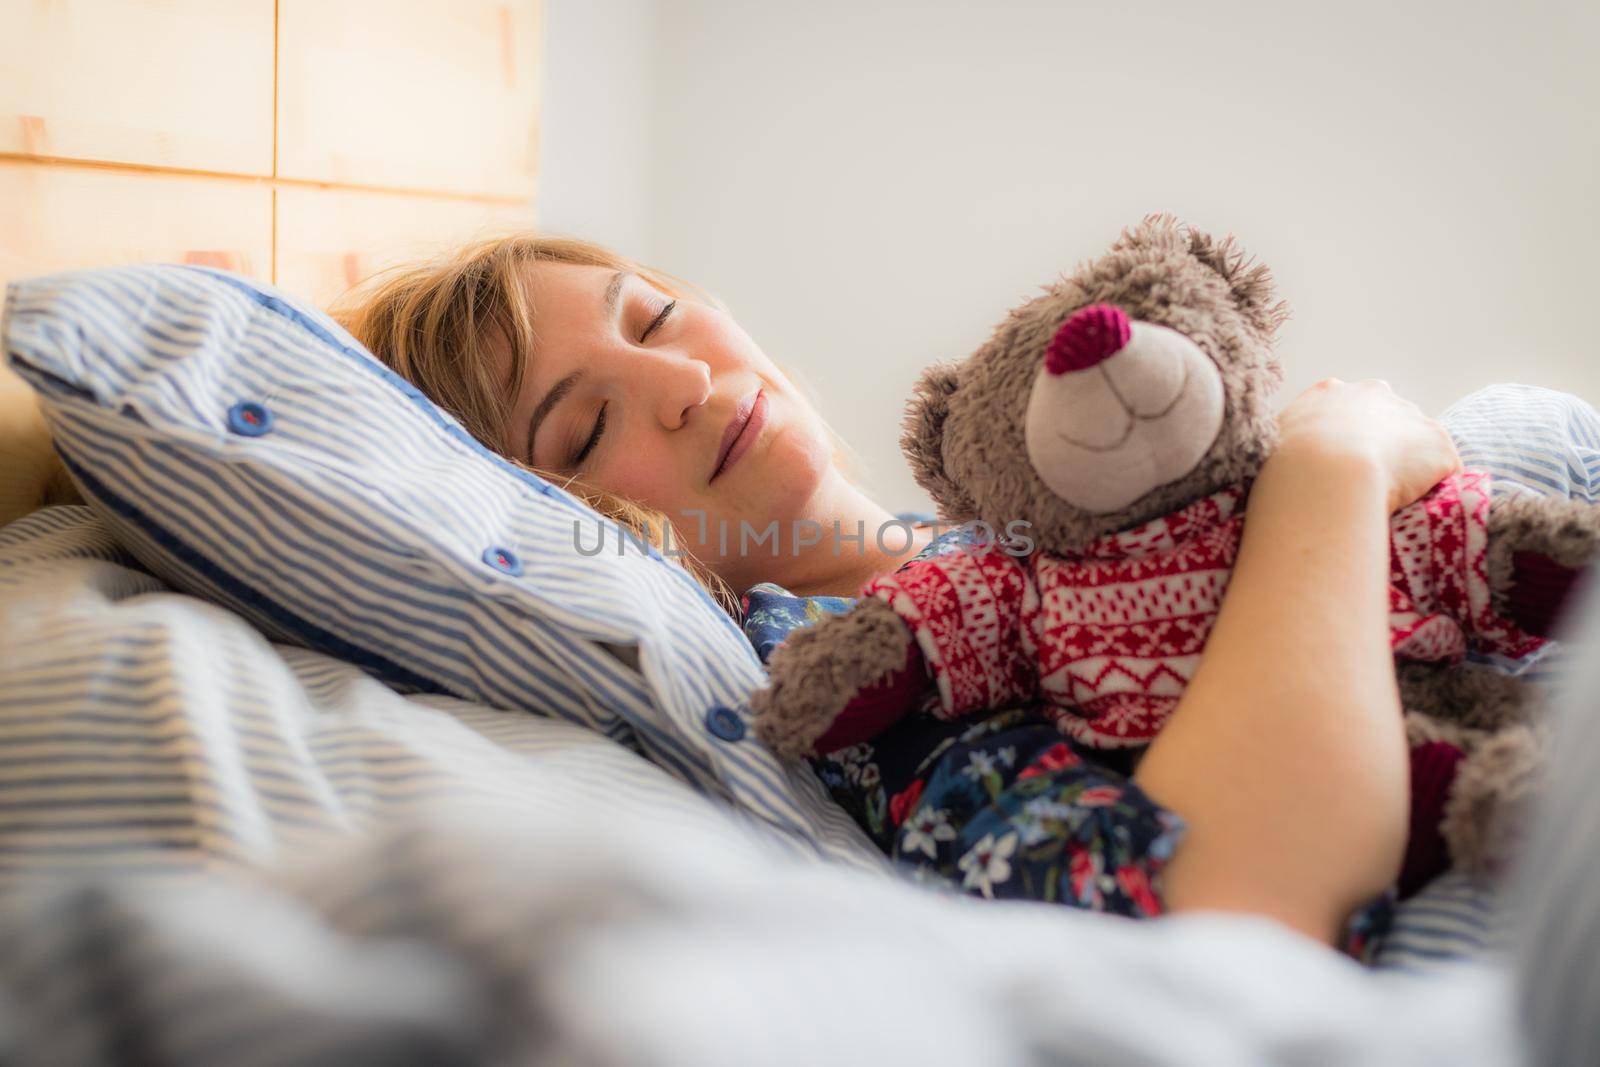 Young woman is sleeping peacefully with her teddy bear in her bedroom